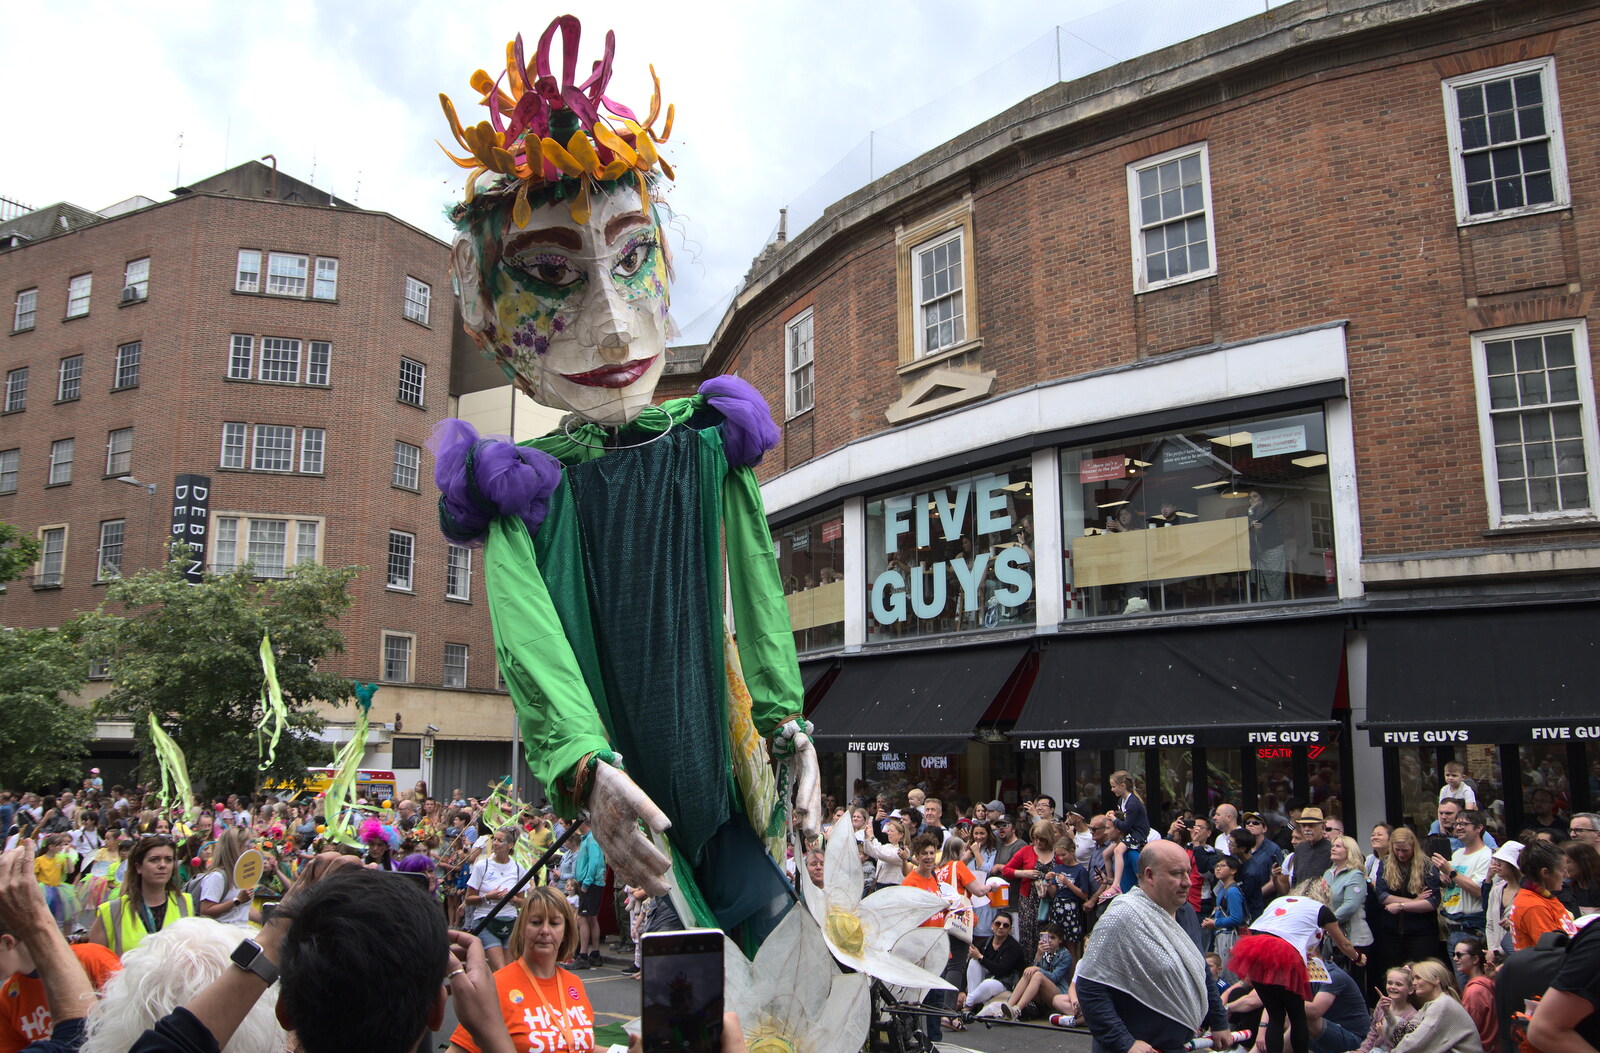 A giant puppet float around from The Lord Mayor's Procession, Norwich, Norfolk - 2nd July 2022